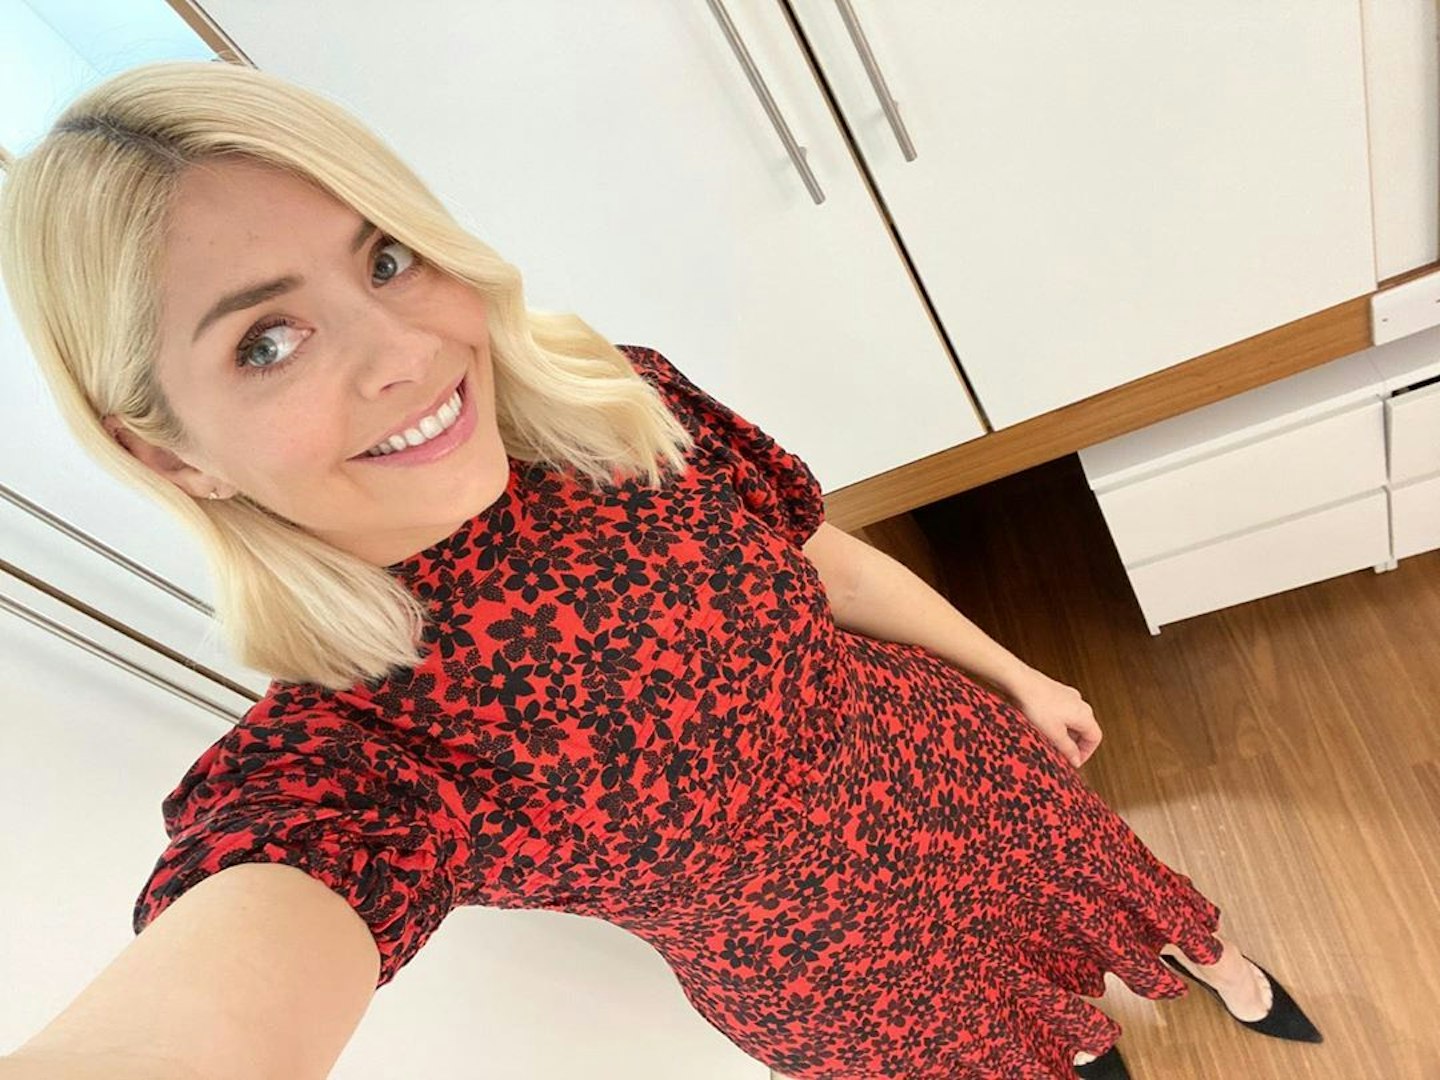 Holly Willoughby's new work shoes are a huge autumn trend - shop the look